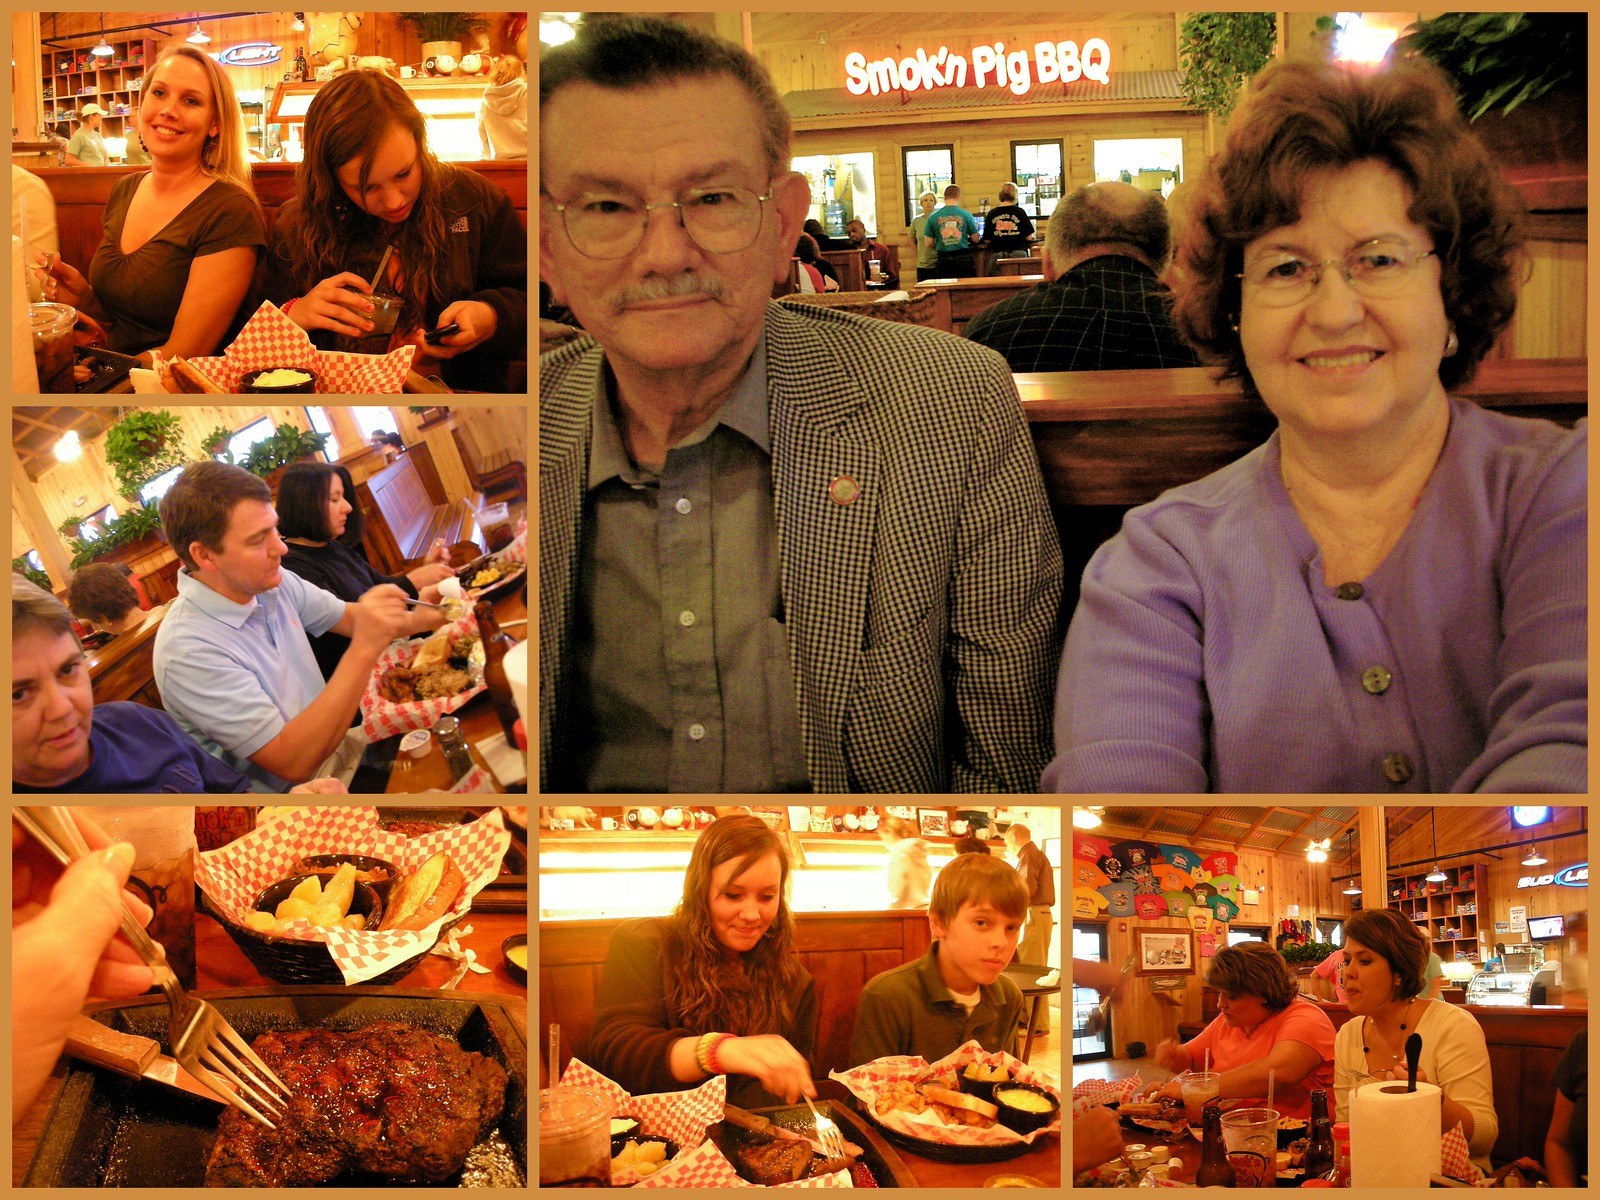 Year 3~Day 97 +68/365 AND Day 828:  Smok'n Pig BBQ - 5th Grade Teachers' Outing